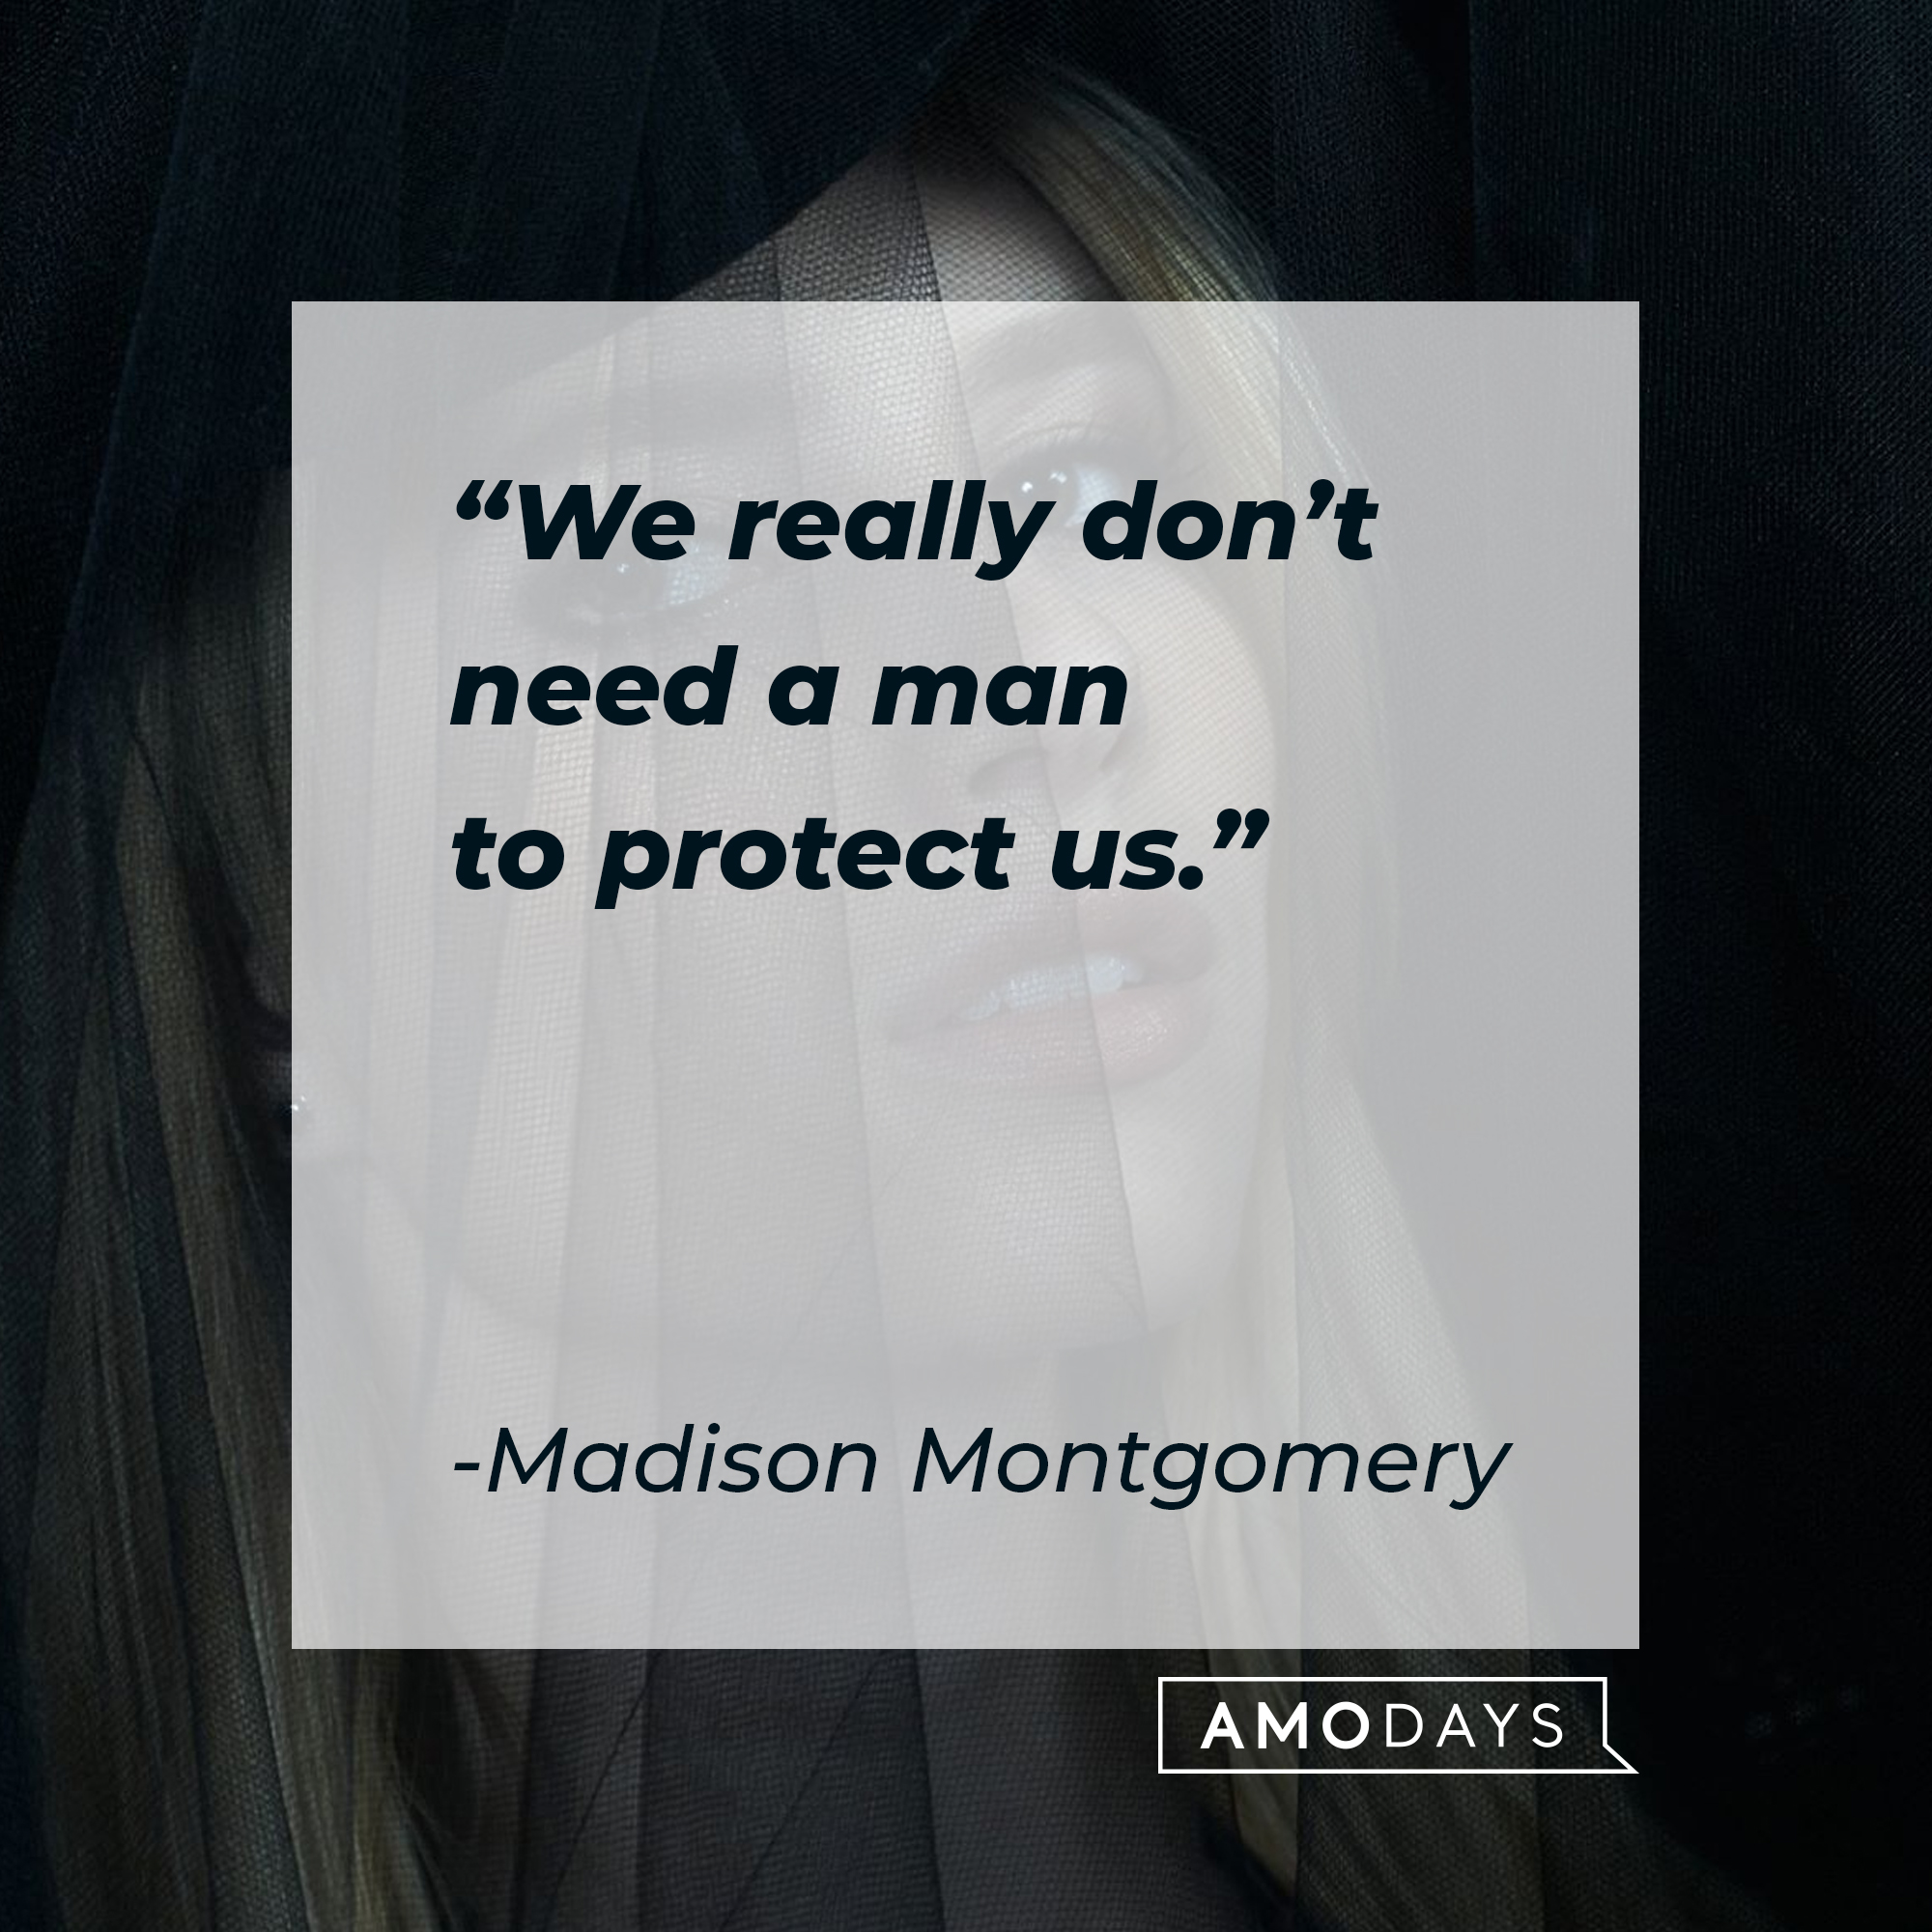 Madison's quote: “We really don’t need a man to protect us.”  | Source: facebook.com/americanhorrorstory